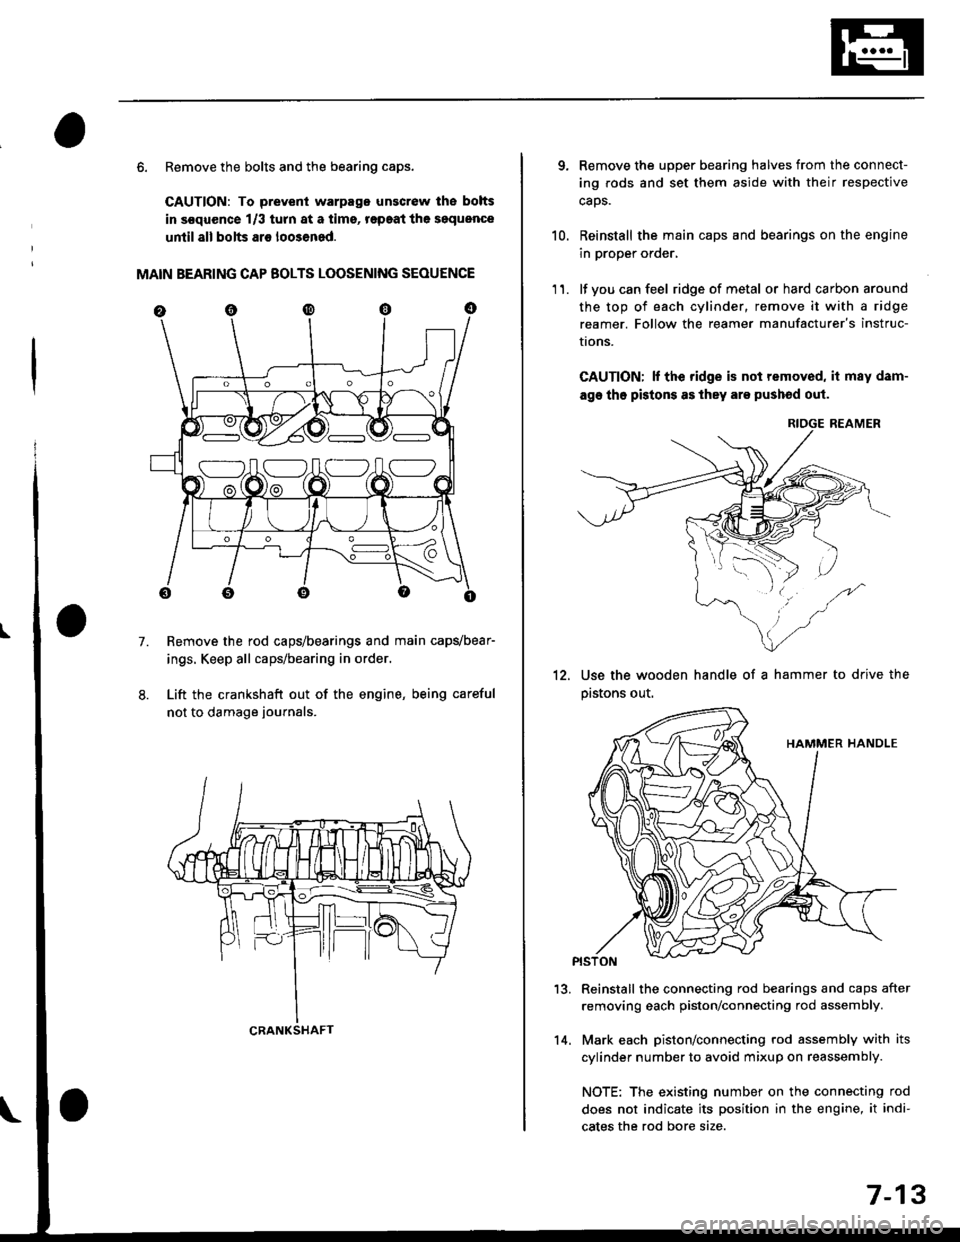 HONDA CIVIC 1999 6.G User Guide 6. Remove the bolts and the bearing caps.
CAUTION: To prevenl warpago unscrow lhe bolts
in s€quence 1/3 turn at a tims, r€paat the soquence
until all bolts ar€ loo3ened.
MAIN BEARING CAP BOLTS L